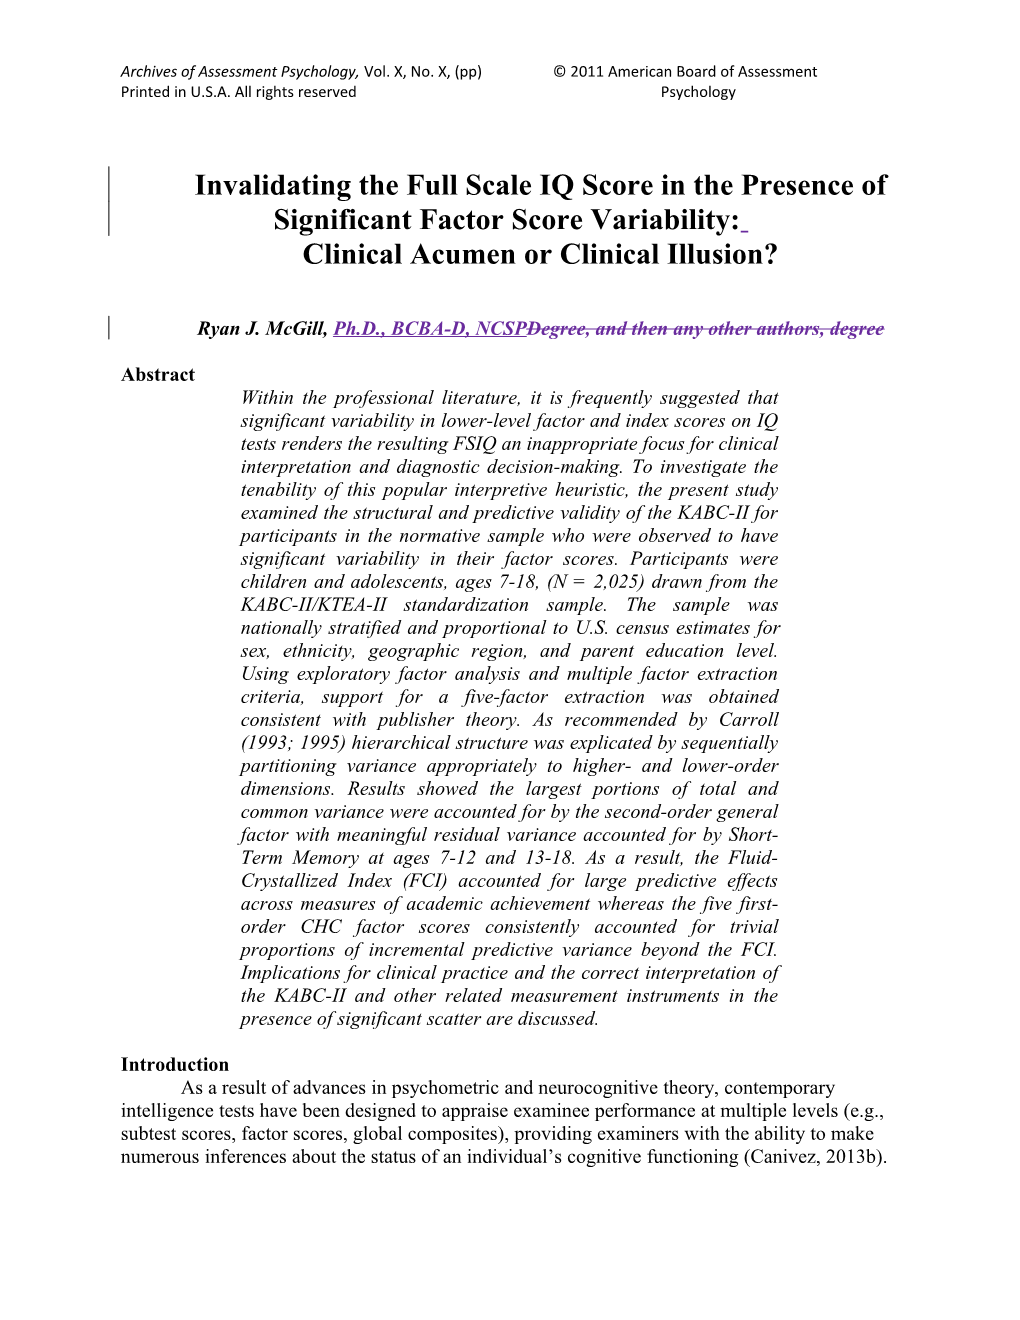 Invalidating the Full Scale IQ Score in the Presence of Significant Factor Score Variability